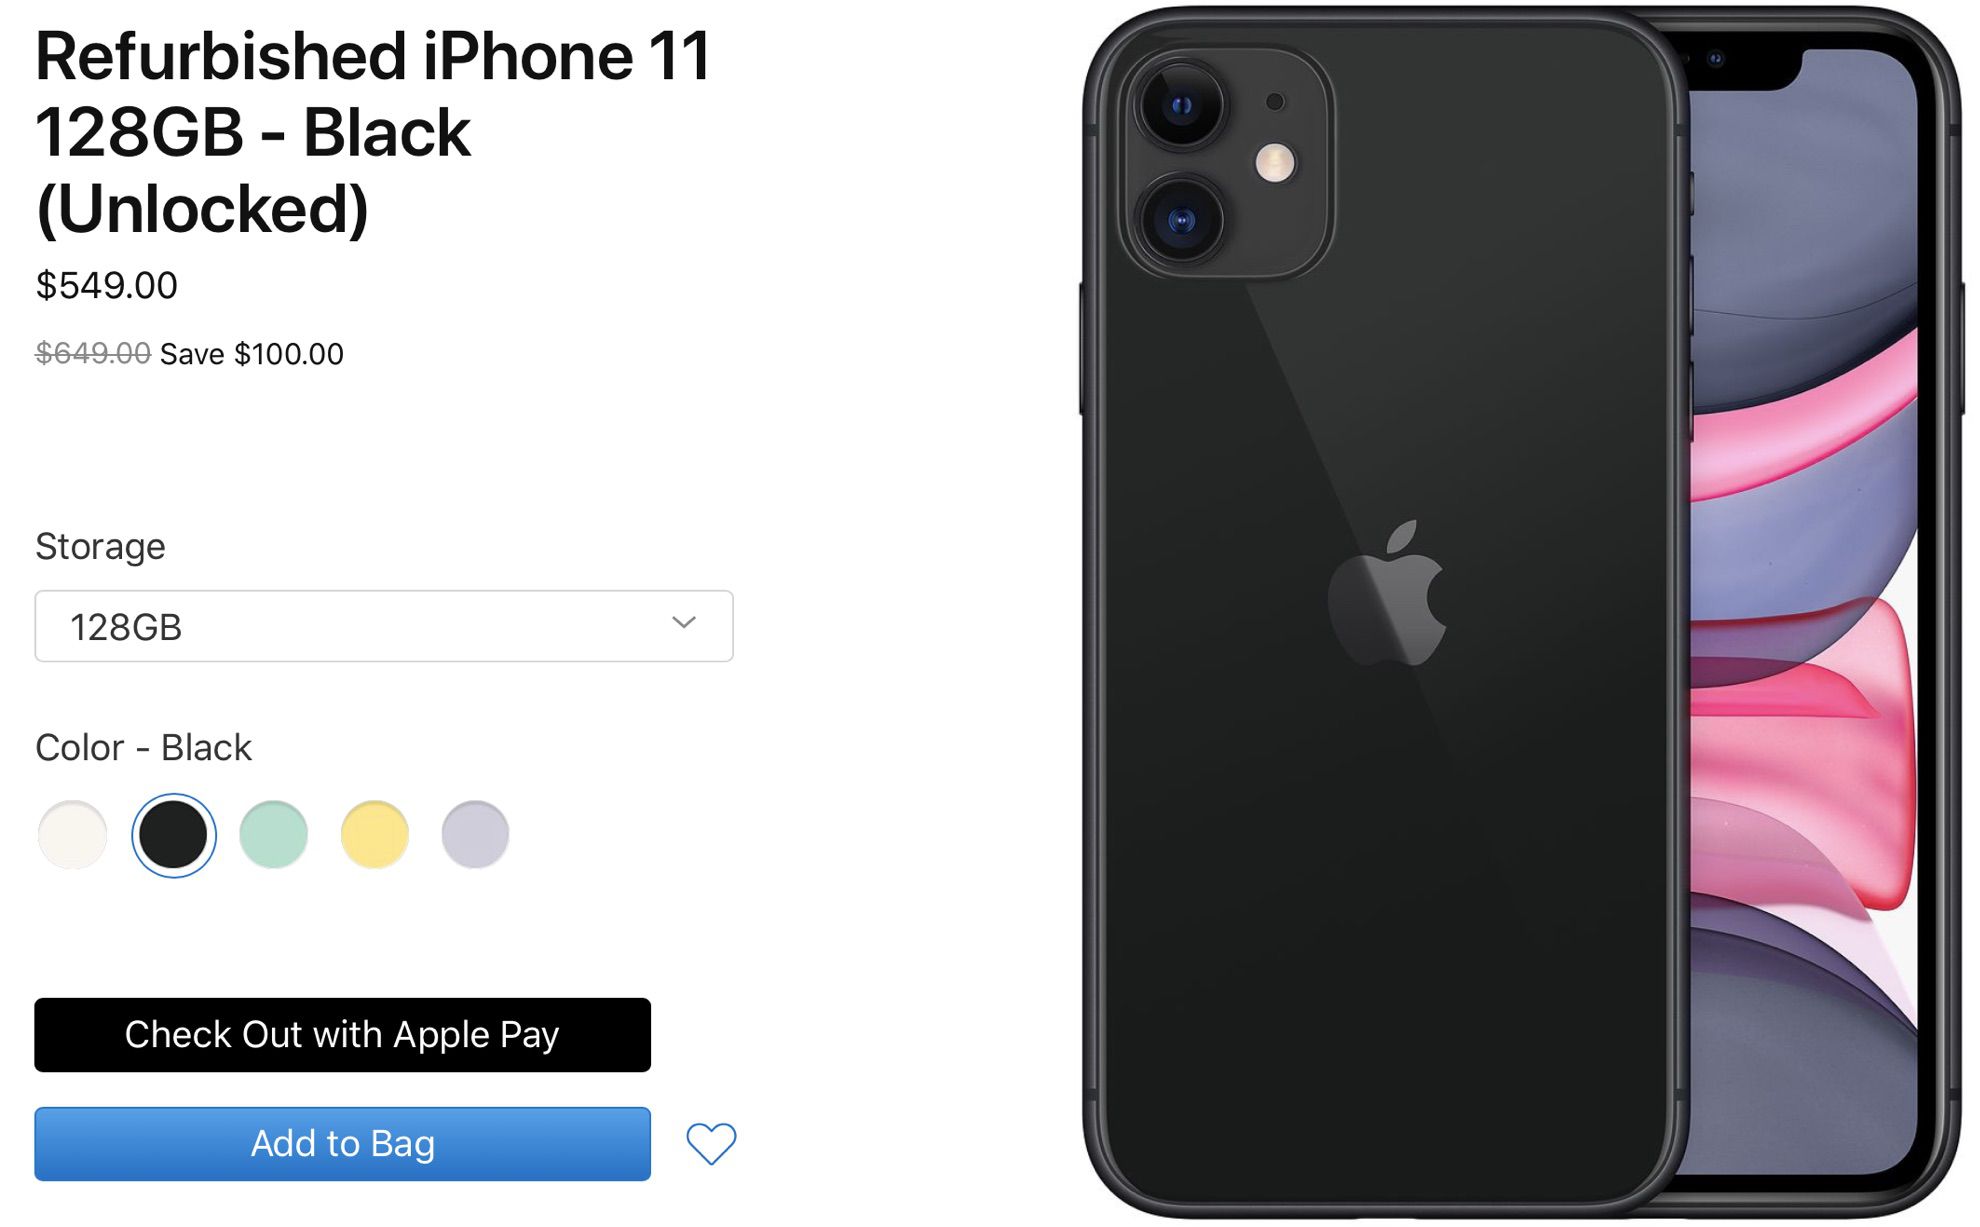 Apple now sells refurbished iPhone 11, 11 Pro and 11 Pro Max models